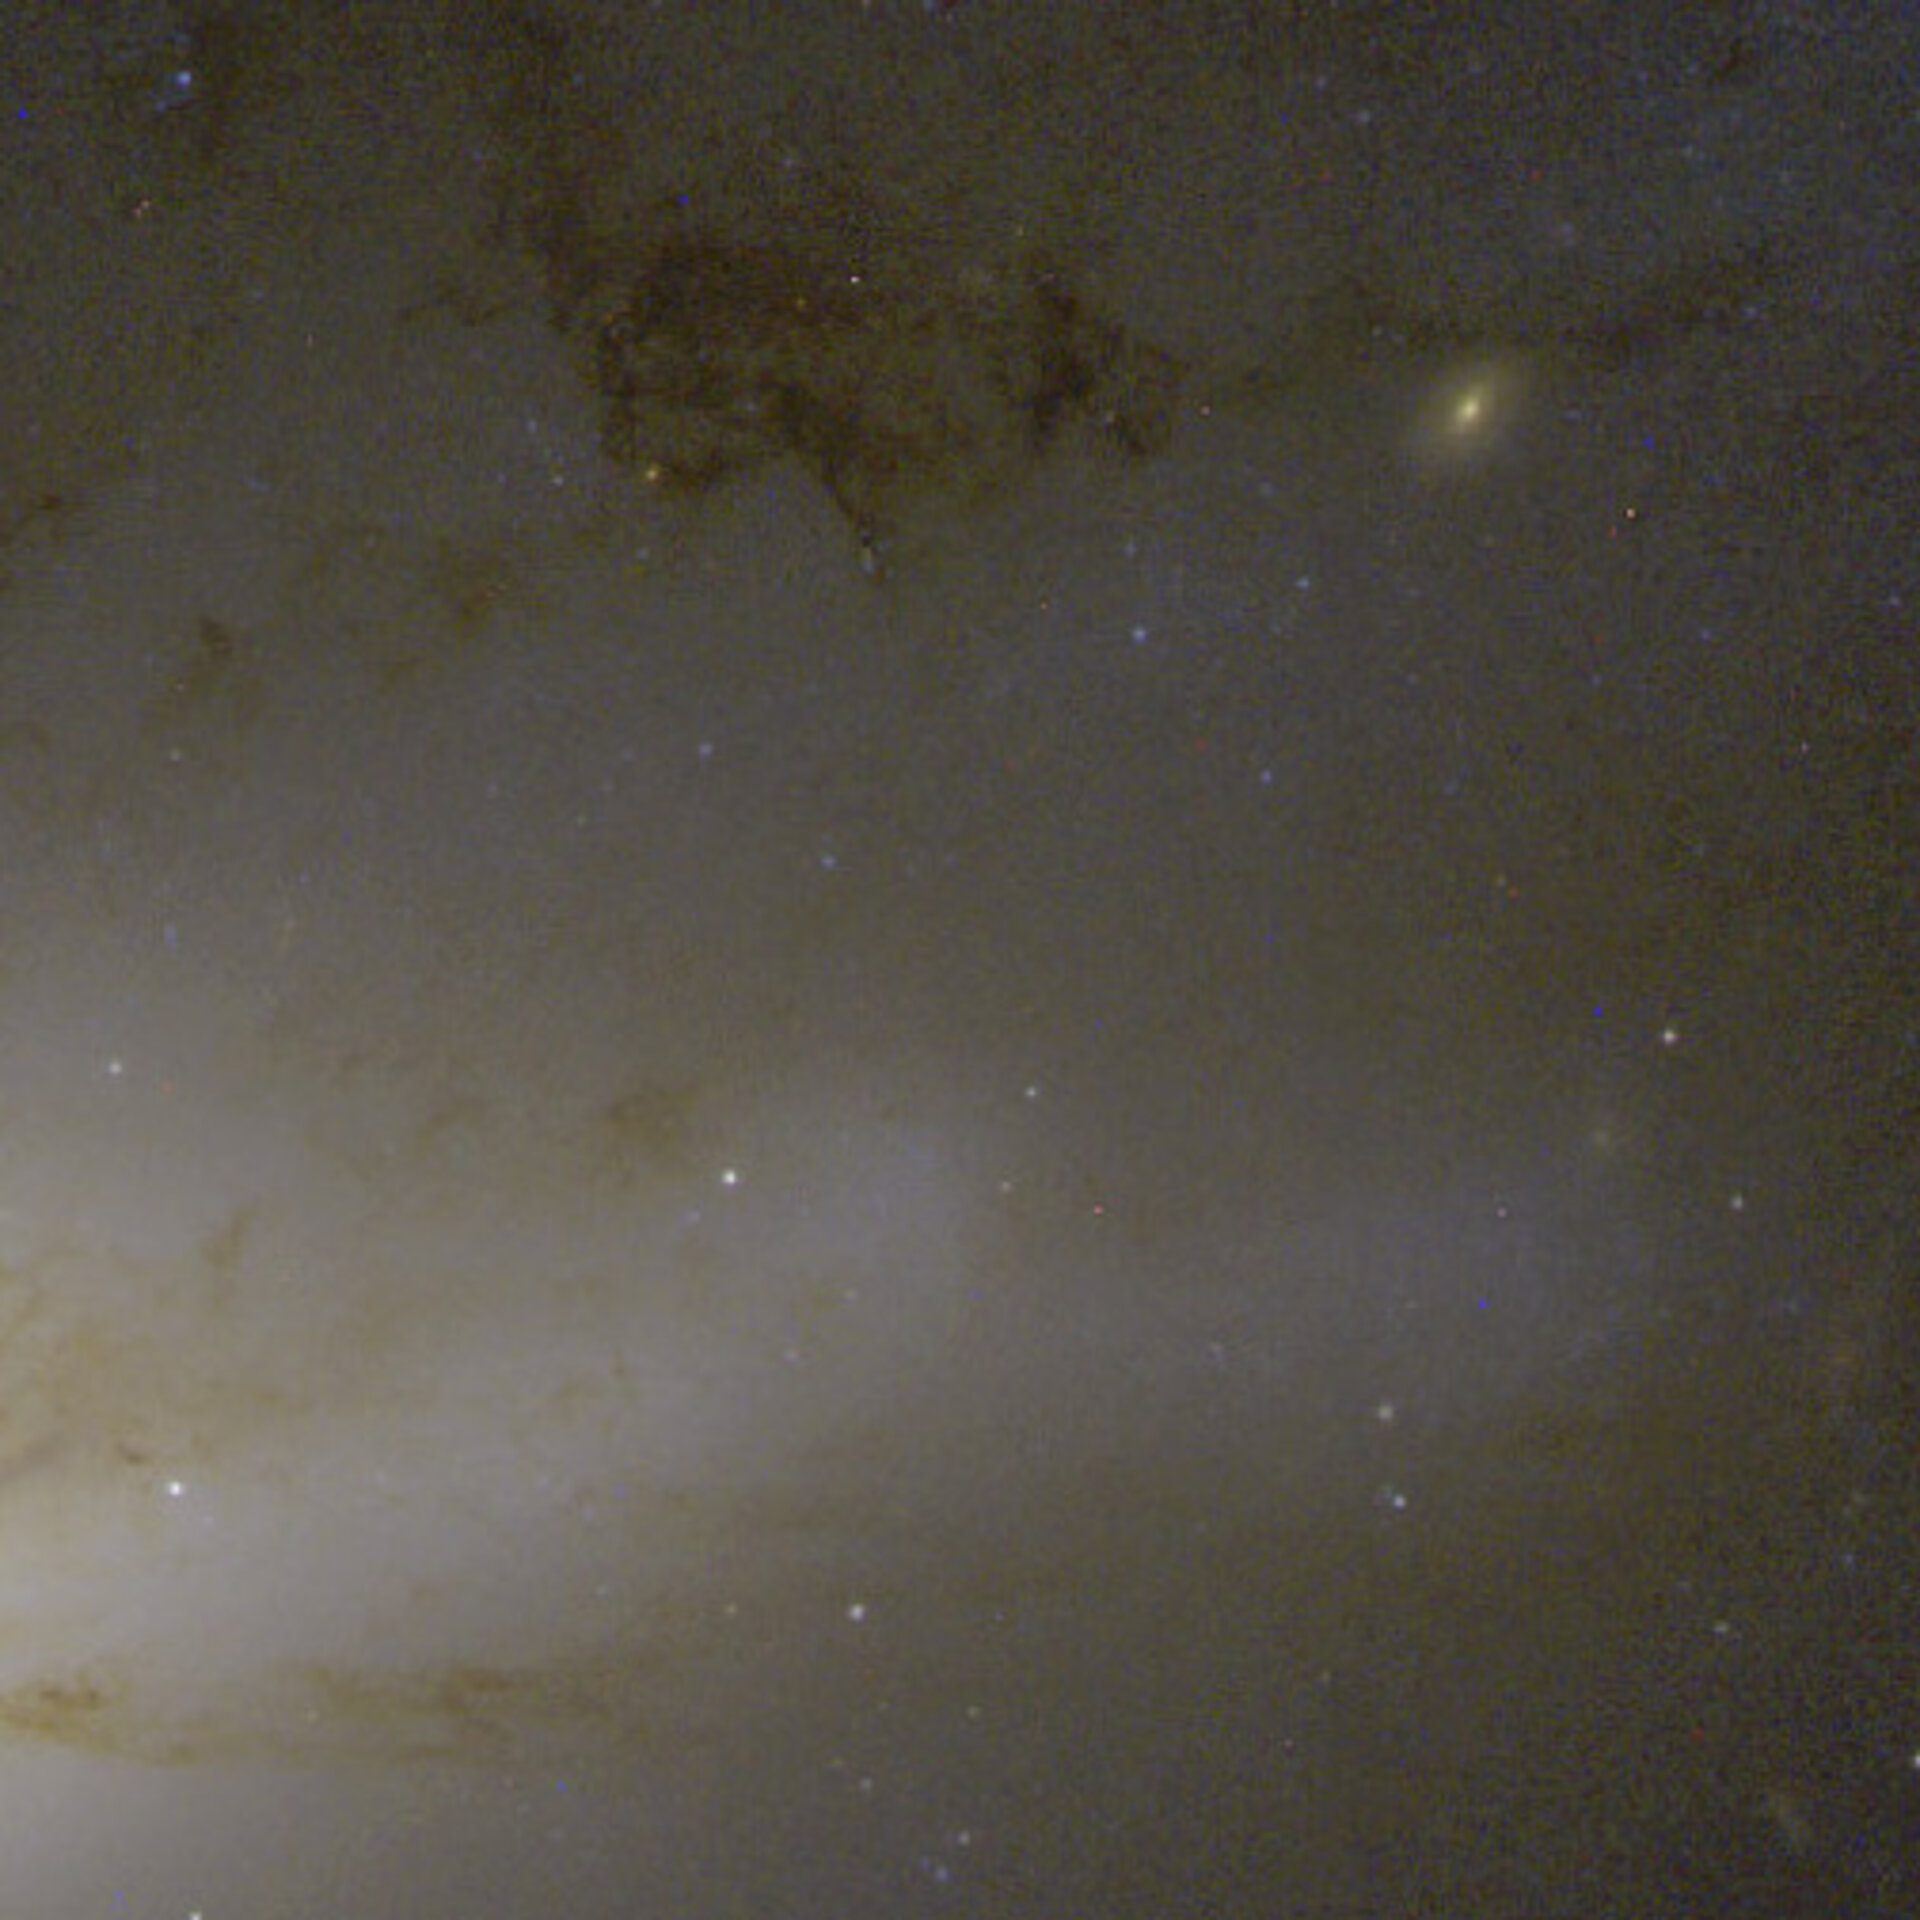 Active galaxy NGC 4438 in the Virgo Cluster, 50 million light-years from Earth